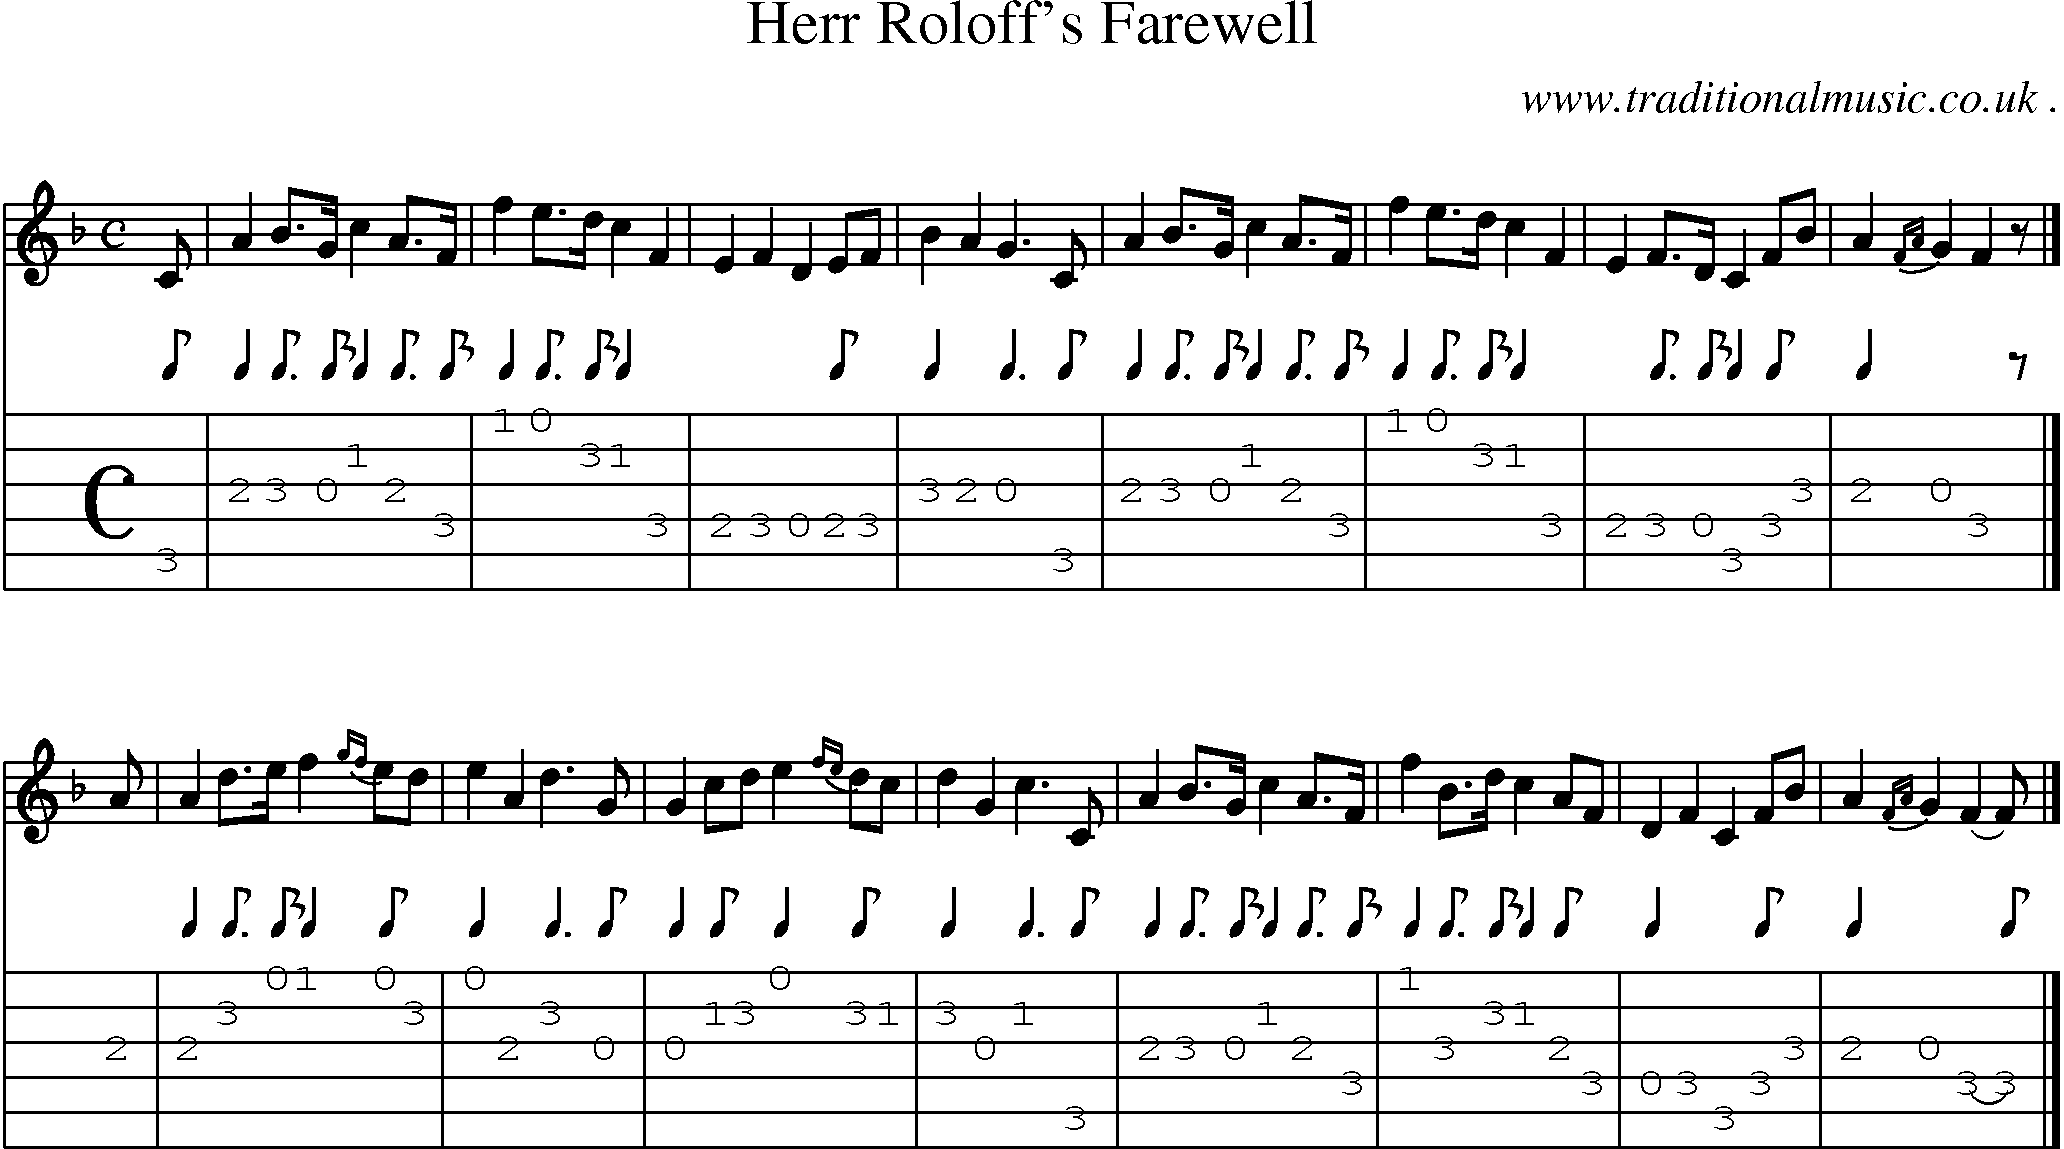 Sheet-music  score, Chords and Guitar Tabs for Herr Roloffs Farewell